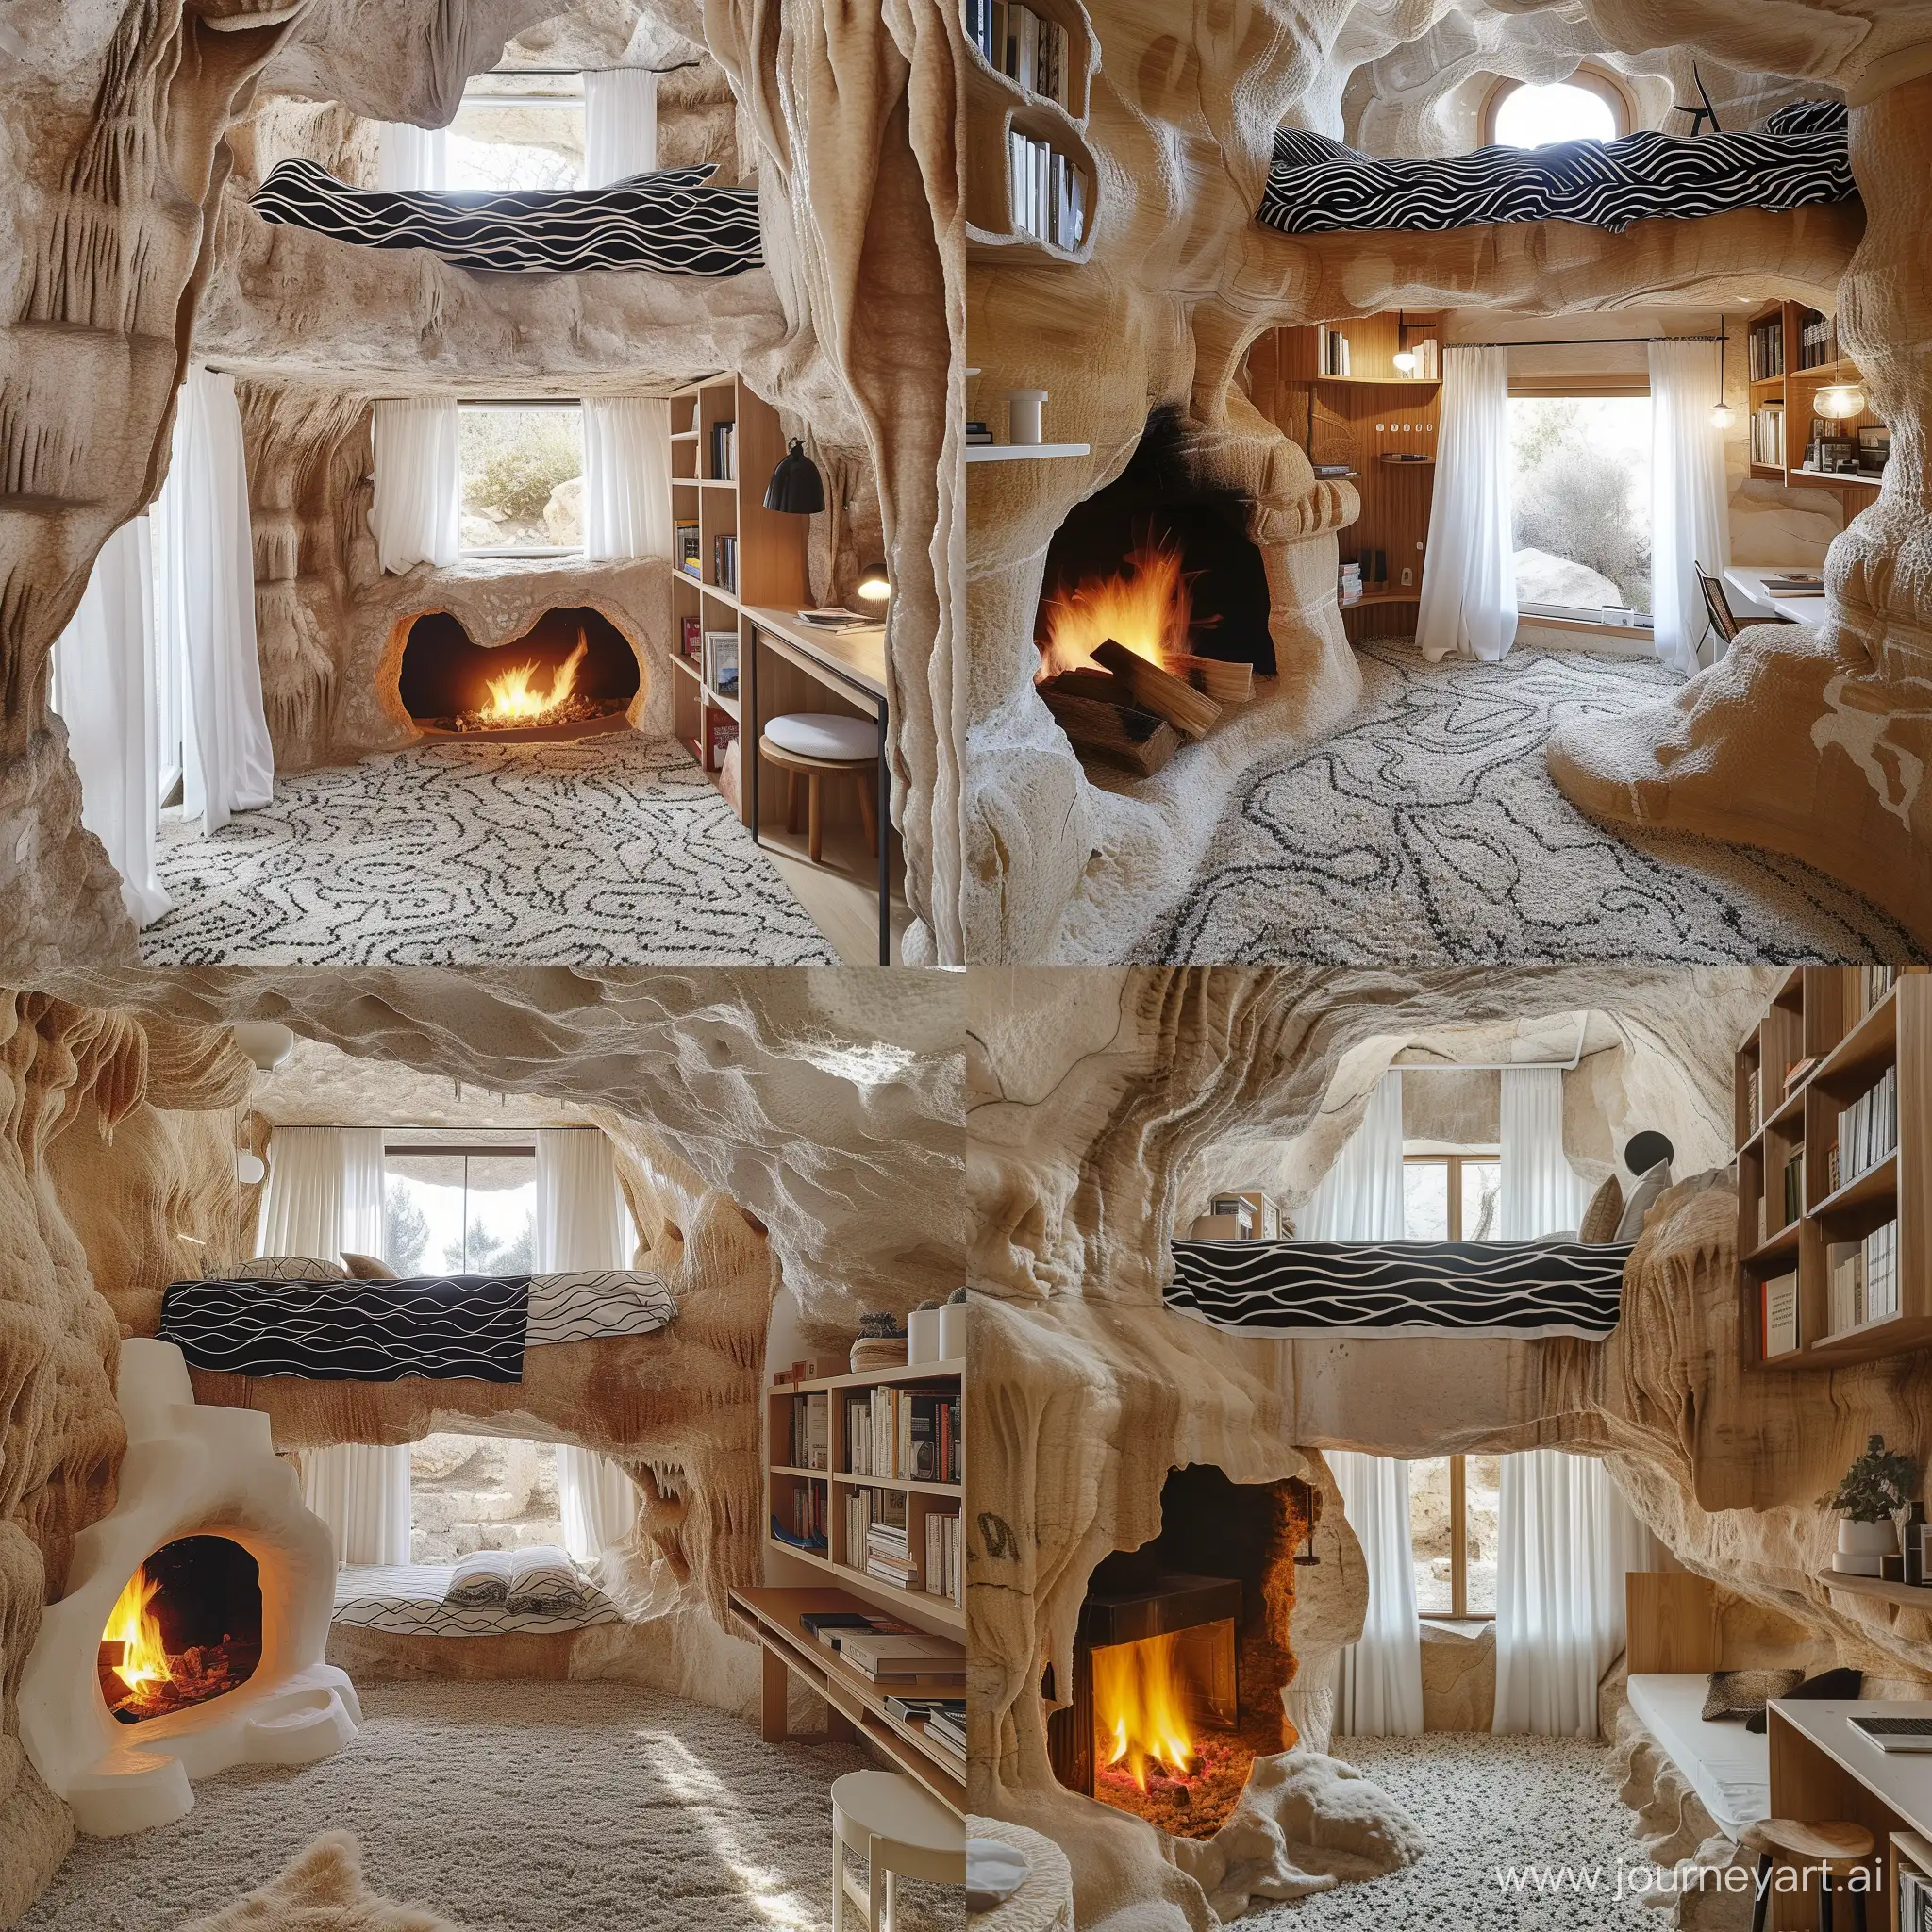 The cave room in the original wood colored rock has a fireplace with a fire, a minimalism black&white cotton cloth printed with waves line, carpet, the bed above has a window, with a fairytale style, Kapinkor, bookshelves, desk, white curtains, outside stalagmites and stalactites, naturalistic materials, white and light brown